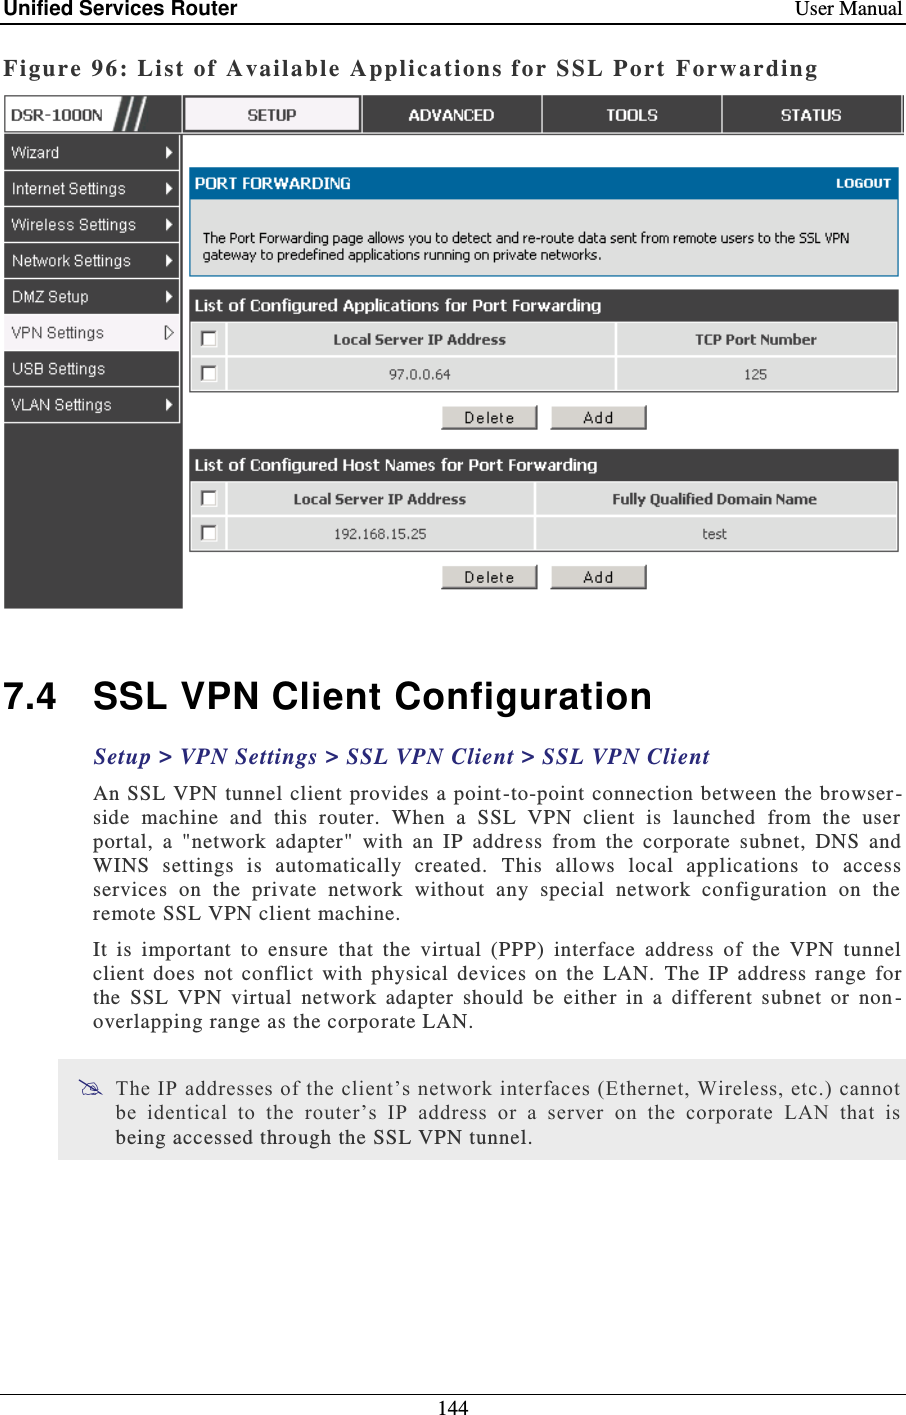 Unified Services Router    User Manual 144  Figure 96: Li st of Available Applica tions for SSL P ort  Forwarding   7.4  SSL VPN Client Configuration Setup &gt; VPN Settings &gt; SSL VPN Client &gt; SSL VPN Client  An SSL VPN tunnel client provides a point -to-point connection between the browser -side  machine  and  this  router.  When  a  SSL  VPN  client  is  launched  from  the  user portal,  a  &quot;network  adapter&quot;  with  an  IP  address  from  the  corporate  subnet,  DNS  and WINS  settings  is  automatically  created.  This  allows  local  applications  to  access services  on  the  private  network  without  any  special  network  configuration  on  the remote SSL VPN client machine. It  is  important  to  ensure  that  the  virtual  (PPP)  interface  address  of  the  VPN  tunnel client  does  not  conflict  with  physical  devices  on  the  LAN.   The  IP  address  range  for the  SSL  VPN  virtual  network  adapter  should  be  either  in  a  different  subnet  or  non -overlapping range as the corporate LAN.   The IP addresses of the client’s network interfaces (Ethernet, Wireless, etc.) cannot be  identical  to  the  router’s  IP  address  or  a  server  on  the  corporate  LAN  that  is being accessed through the SSL VPN tunnel.   